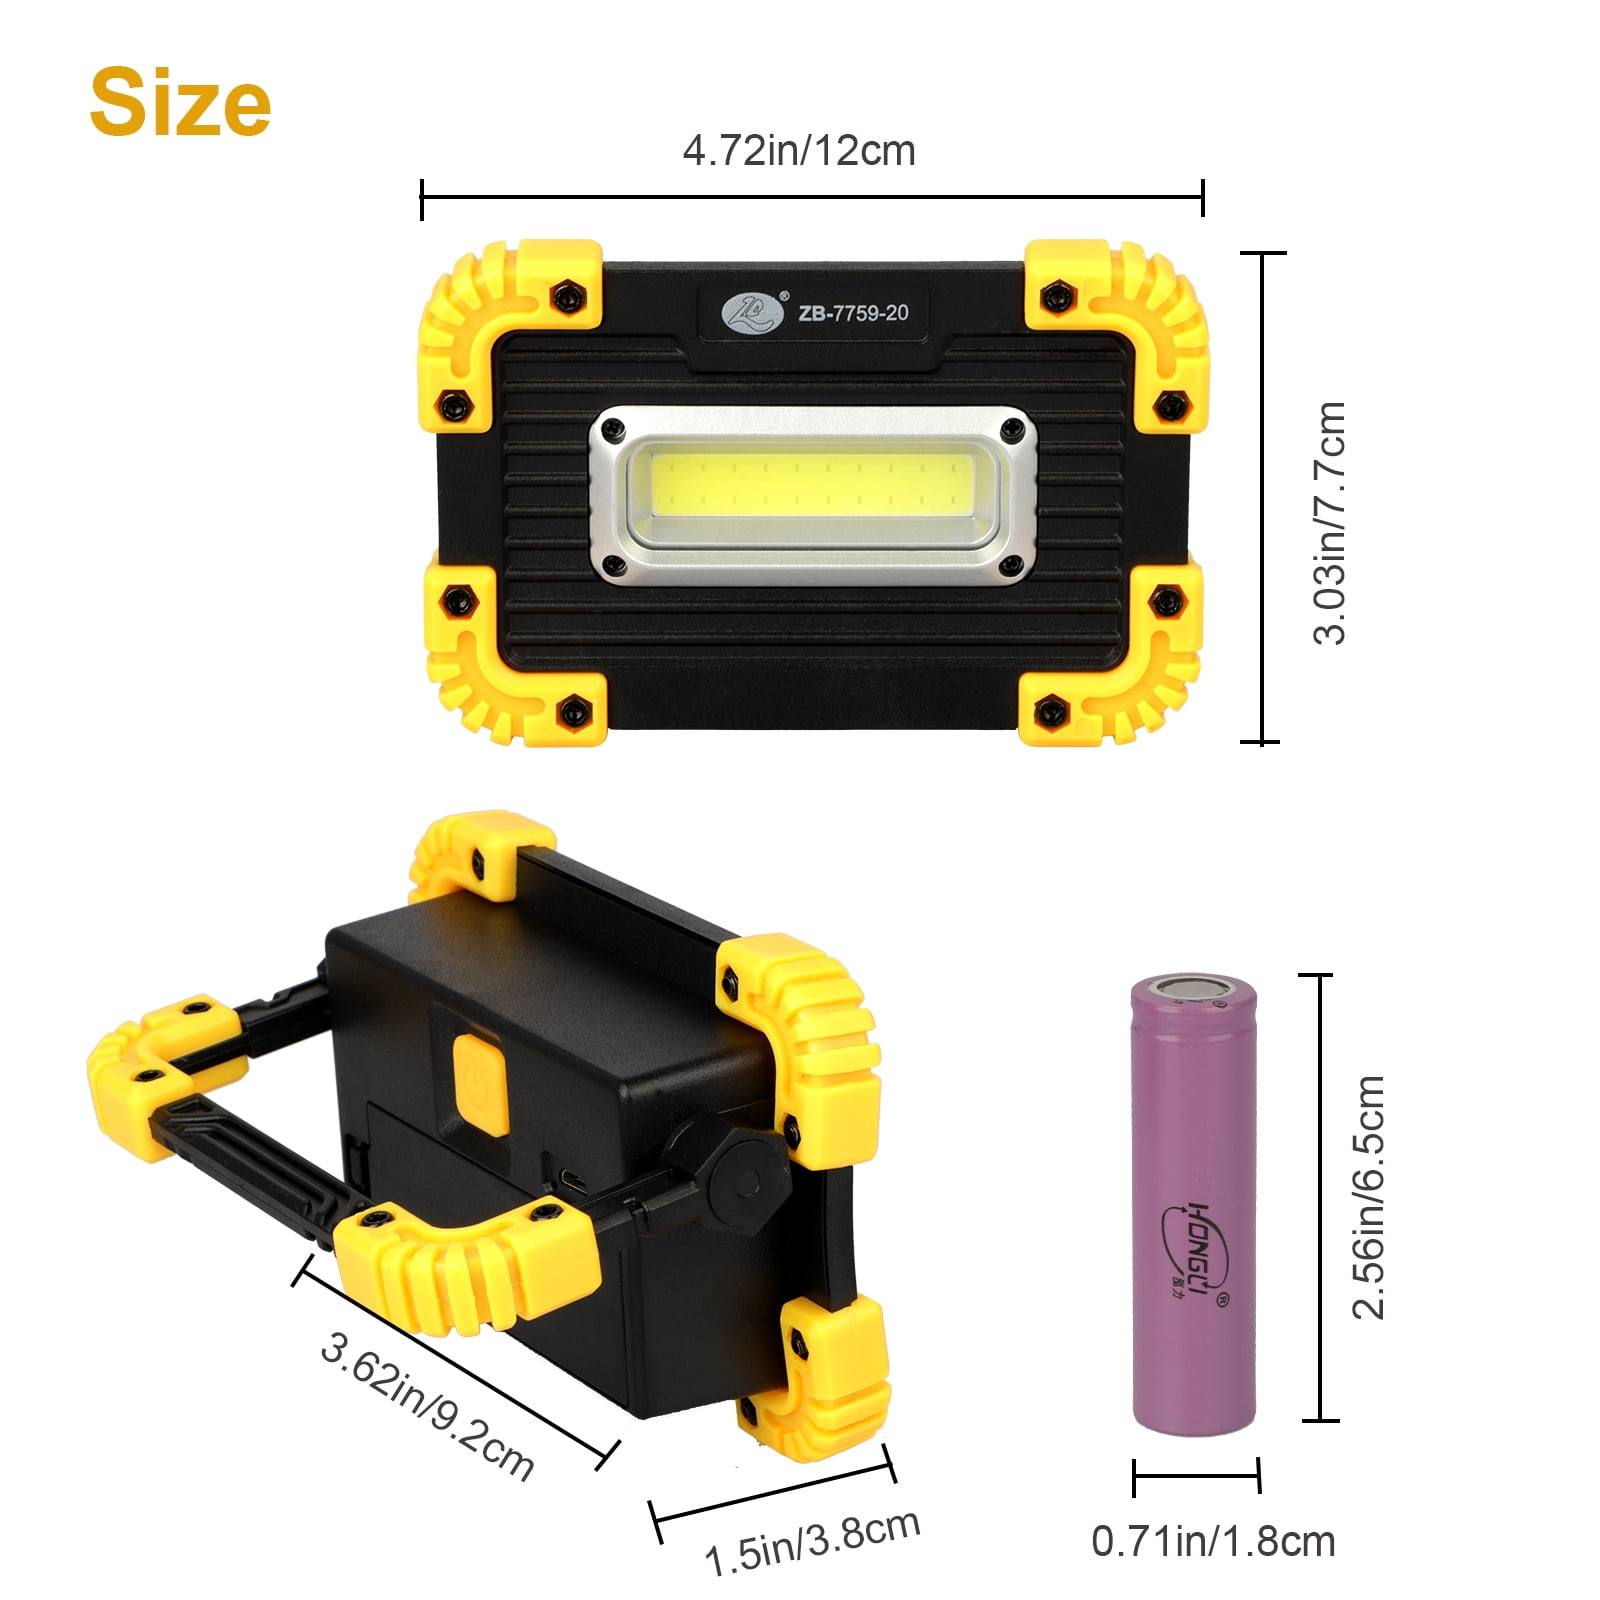 2pcs Rechargeable LED Work Light Portable, TSV 300LM 180° Rotatable COB  Inspection Lamp Waterproof with 1200MAH Battery, 3 Lighting Modes for  Camping Hiking Car Repairing 